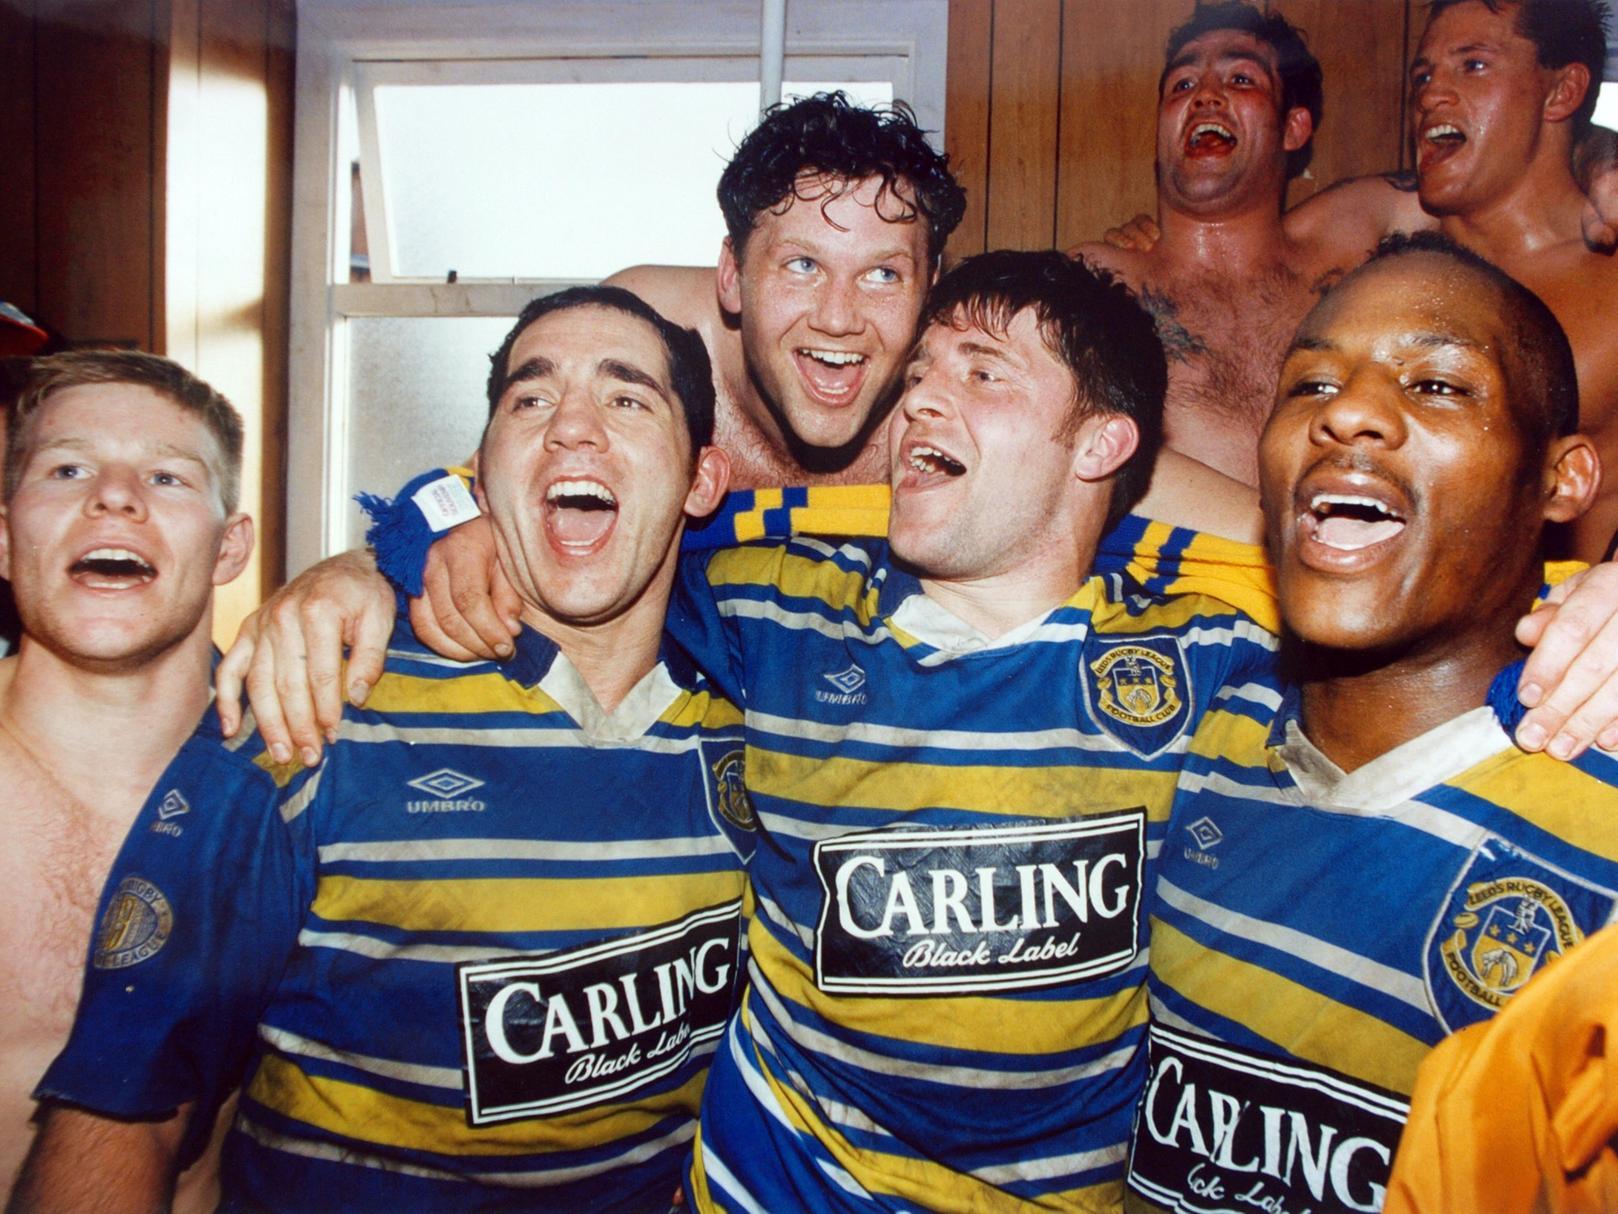 Leeds RL celebrate their Silk Cut Challenge Cup semi final win against St. Helens. Pictured, left to right, are Jason Donohue, Richie Eyres, Neil Harmon, Alan Tait, Gary Rose, Ellery Hanley and Gary Mercer.